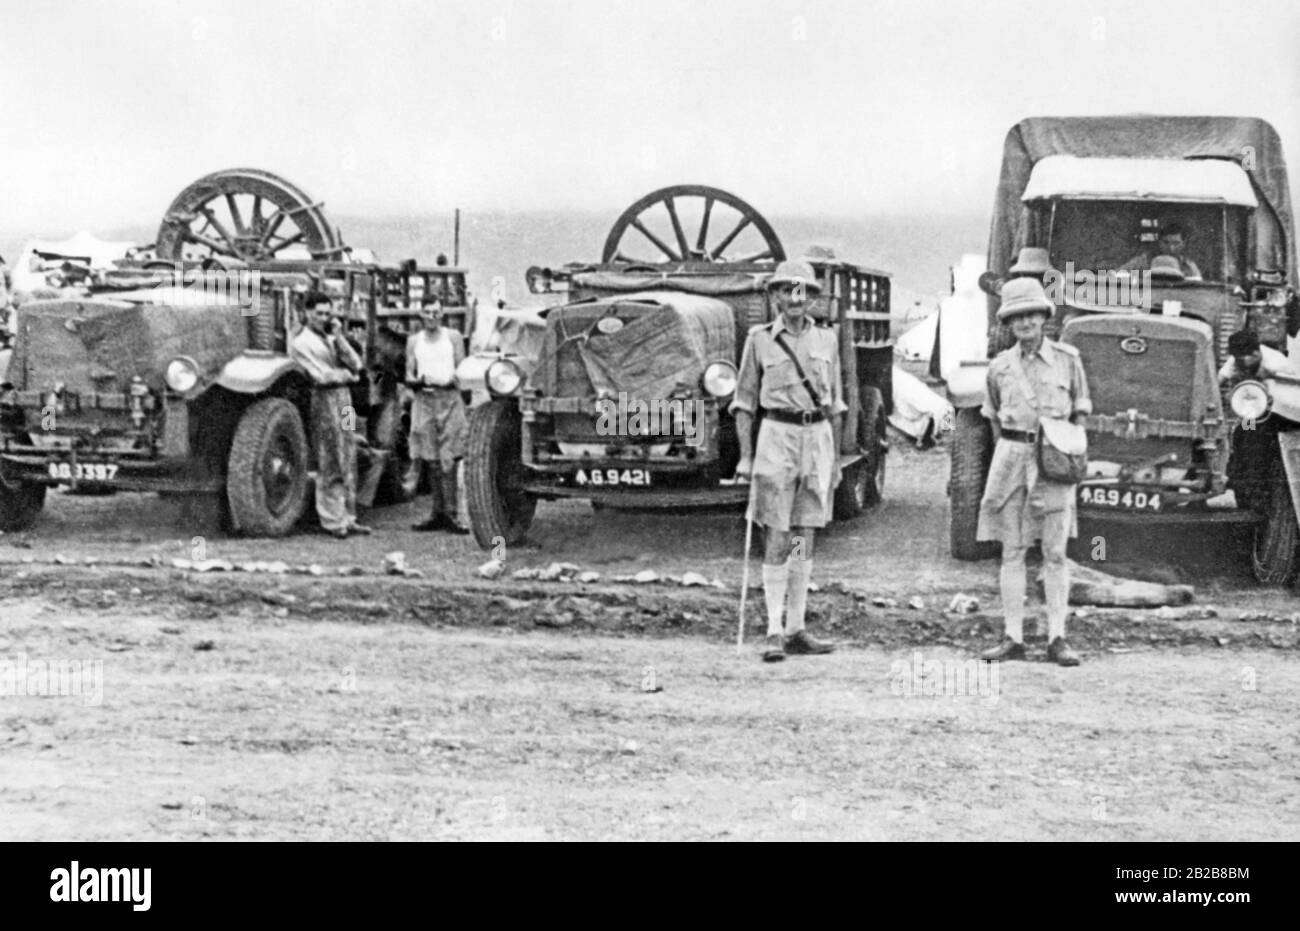 Guard parade of the English troops in Fort Landi Kotal at the Khyber Pass in northwest British India. Locals in the region rebelled against the colonial masters in the 1930s. Today the area belongs to the west of Pakistan. Stock Photo